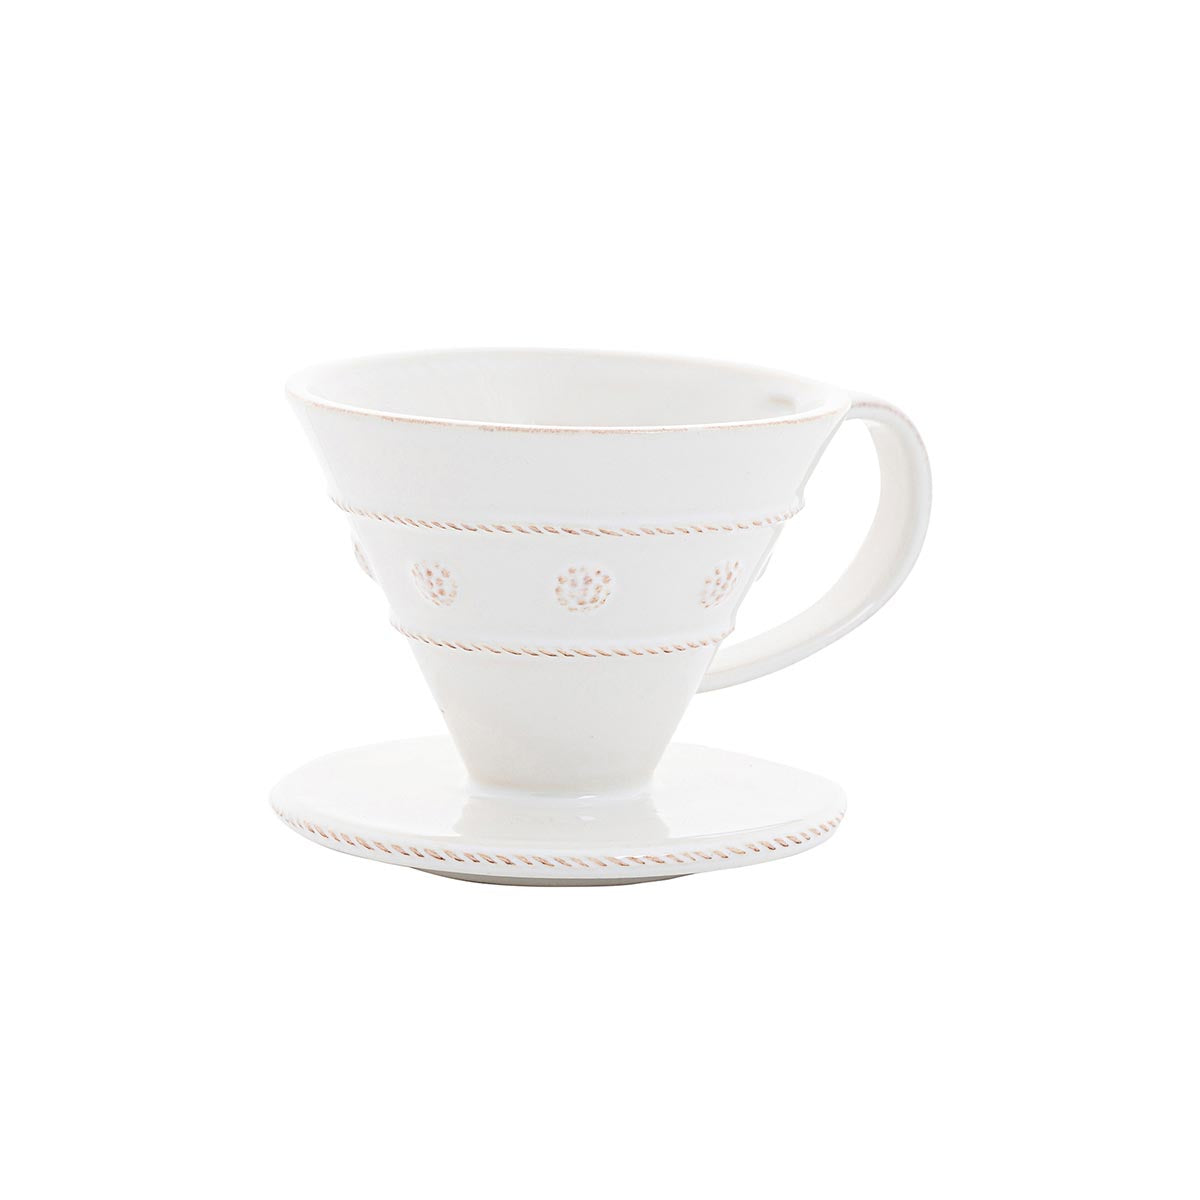 Berry & Thread Pour Over Coffee Cup - Whitewash-1st